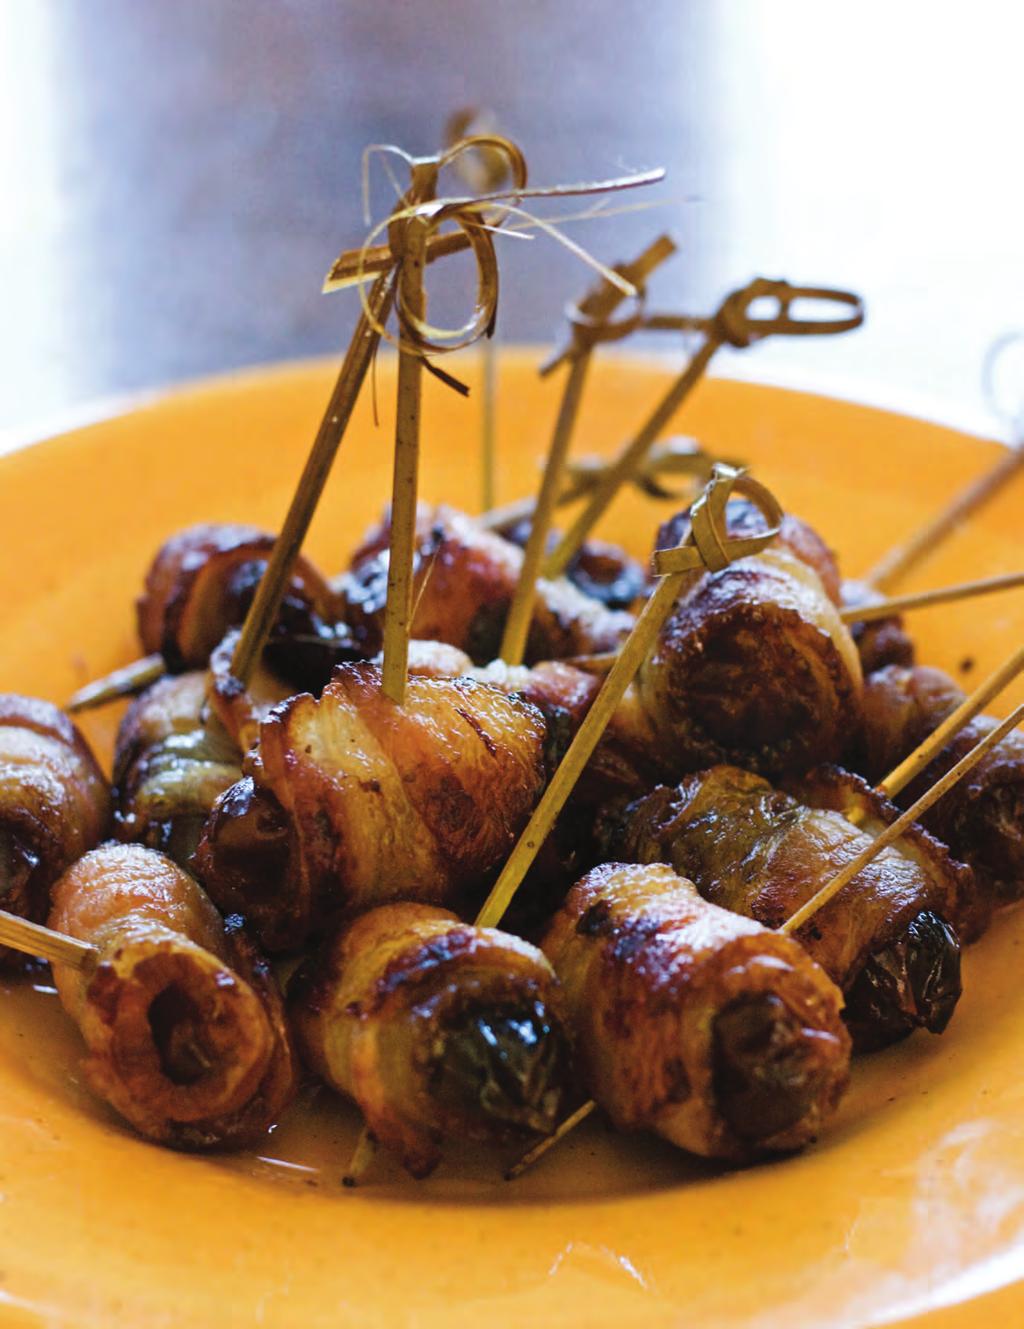 Bacon Wrapped Dates You don t have to choose between salty and sweet. You can have both in this indulgent combination of crisp bacon and sweet chewy dates.